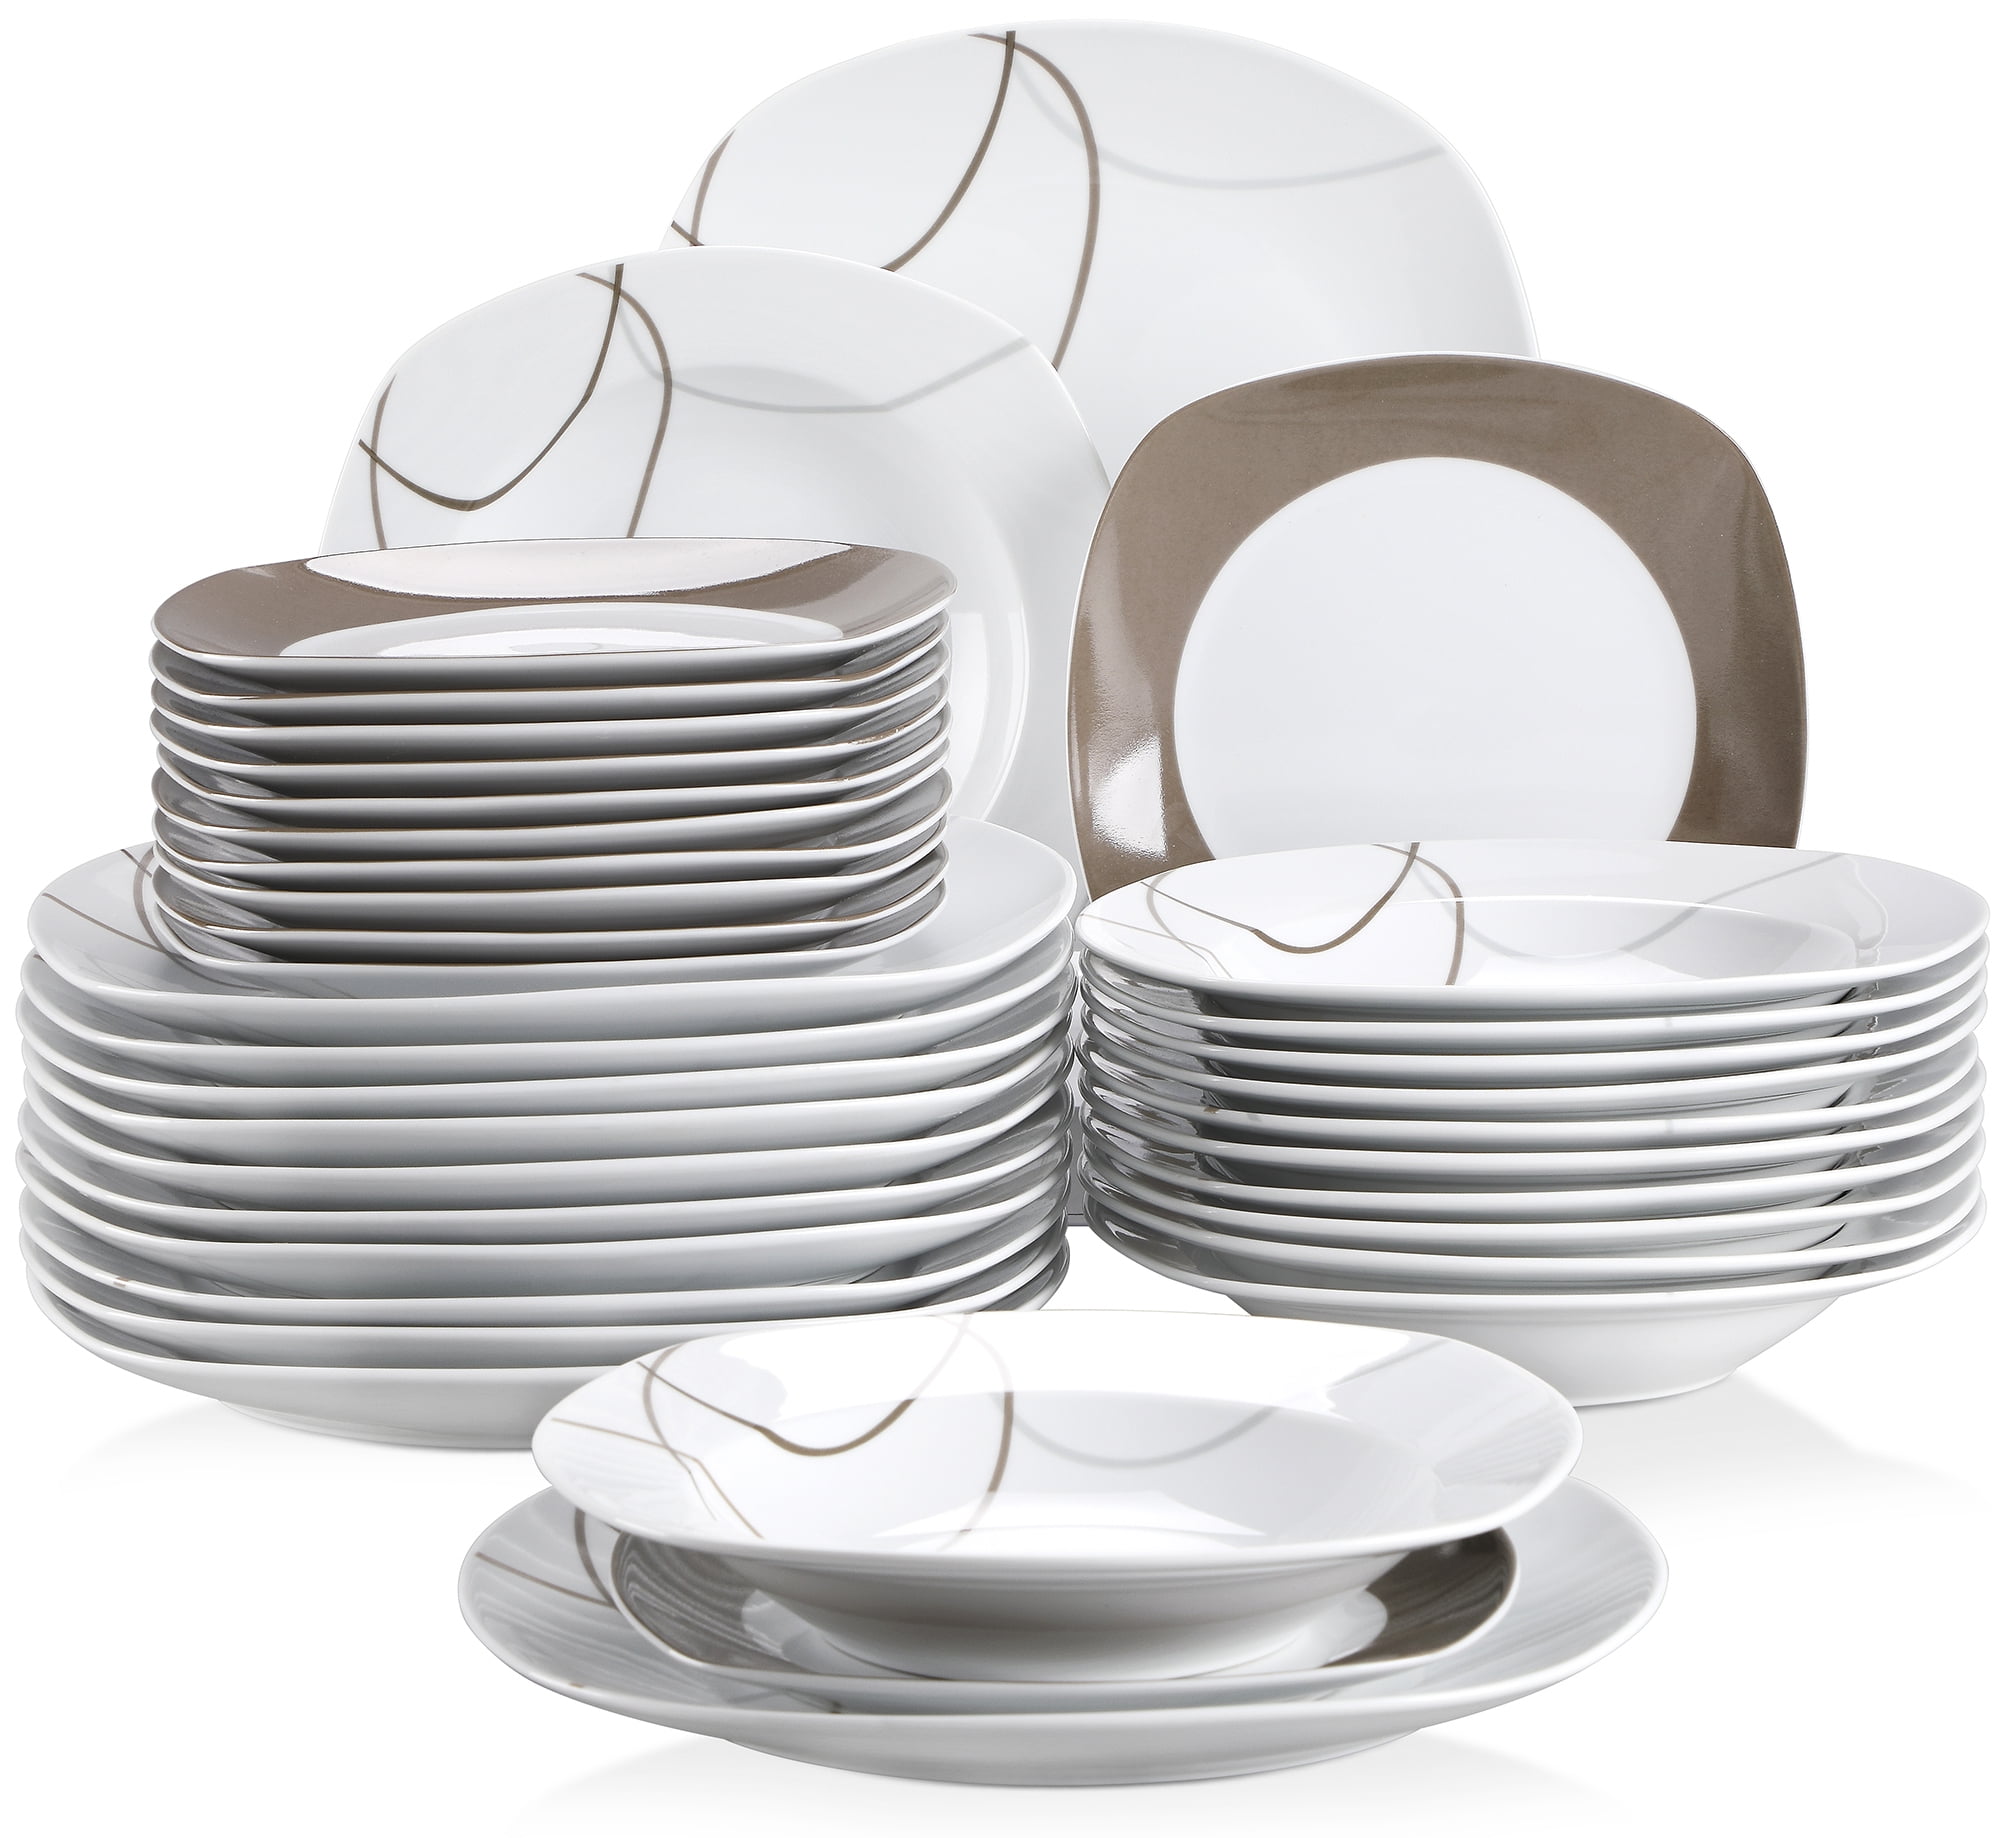 VEWEET Fiona 30-Piece Ivory White Black Lines Porcelain China Ceramic Dinner Combi-Set with Dessert Plates/Soup Plates/Dinner Plates/Cups/Saucers Service for 6 